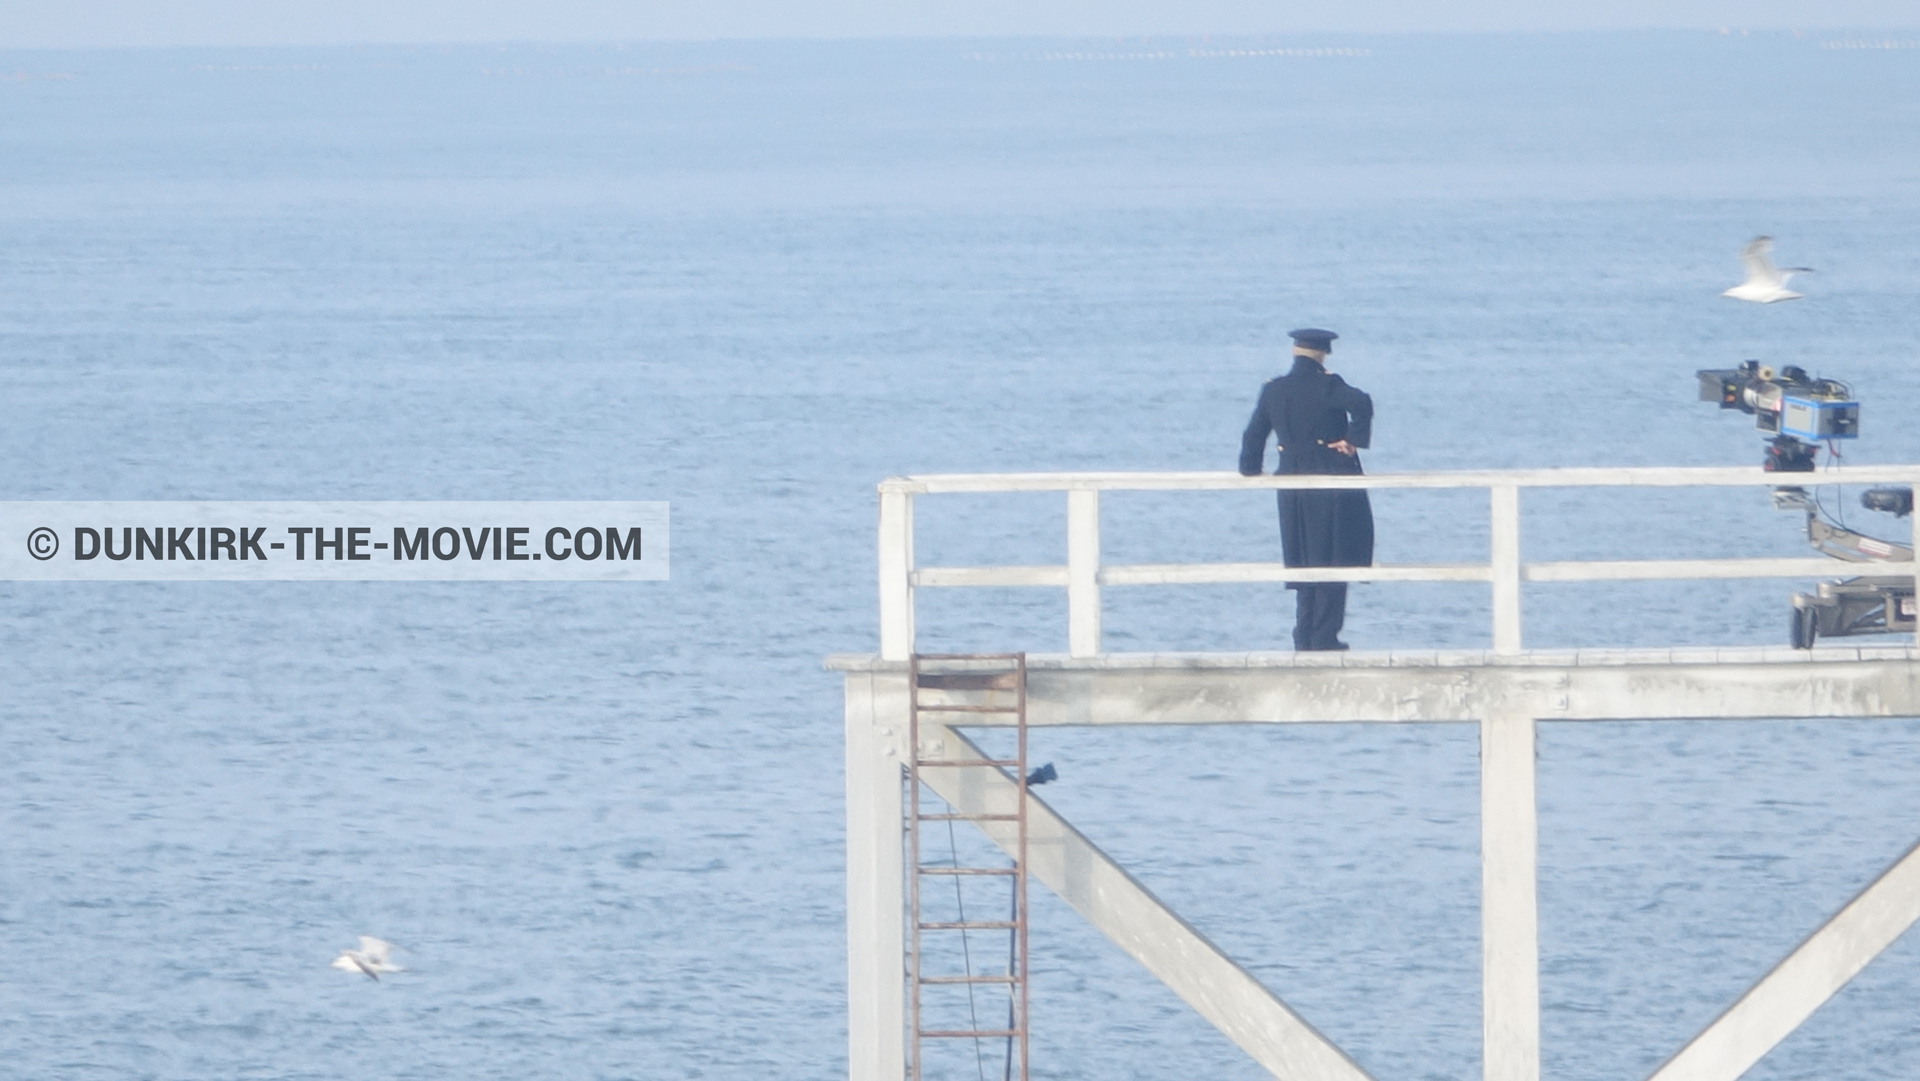 Picture with actor, IMAX camera, EST pier,  from behind the scene of the Dunkirk movie by Nolan